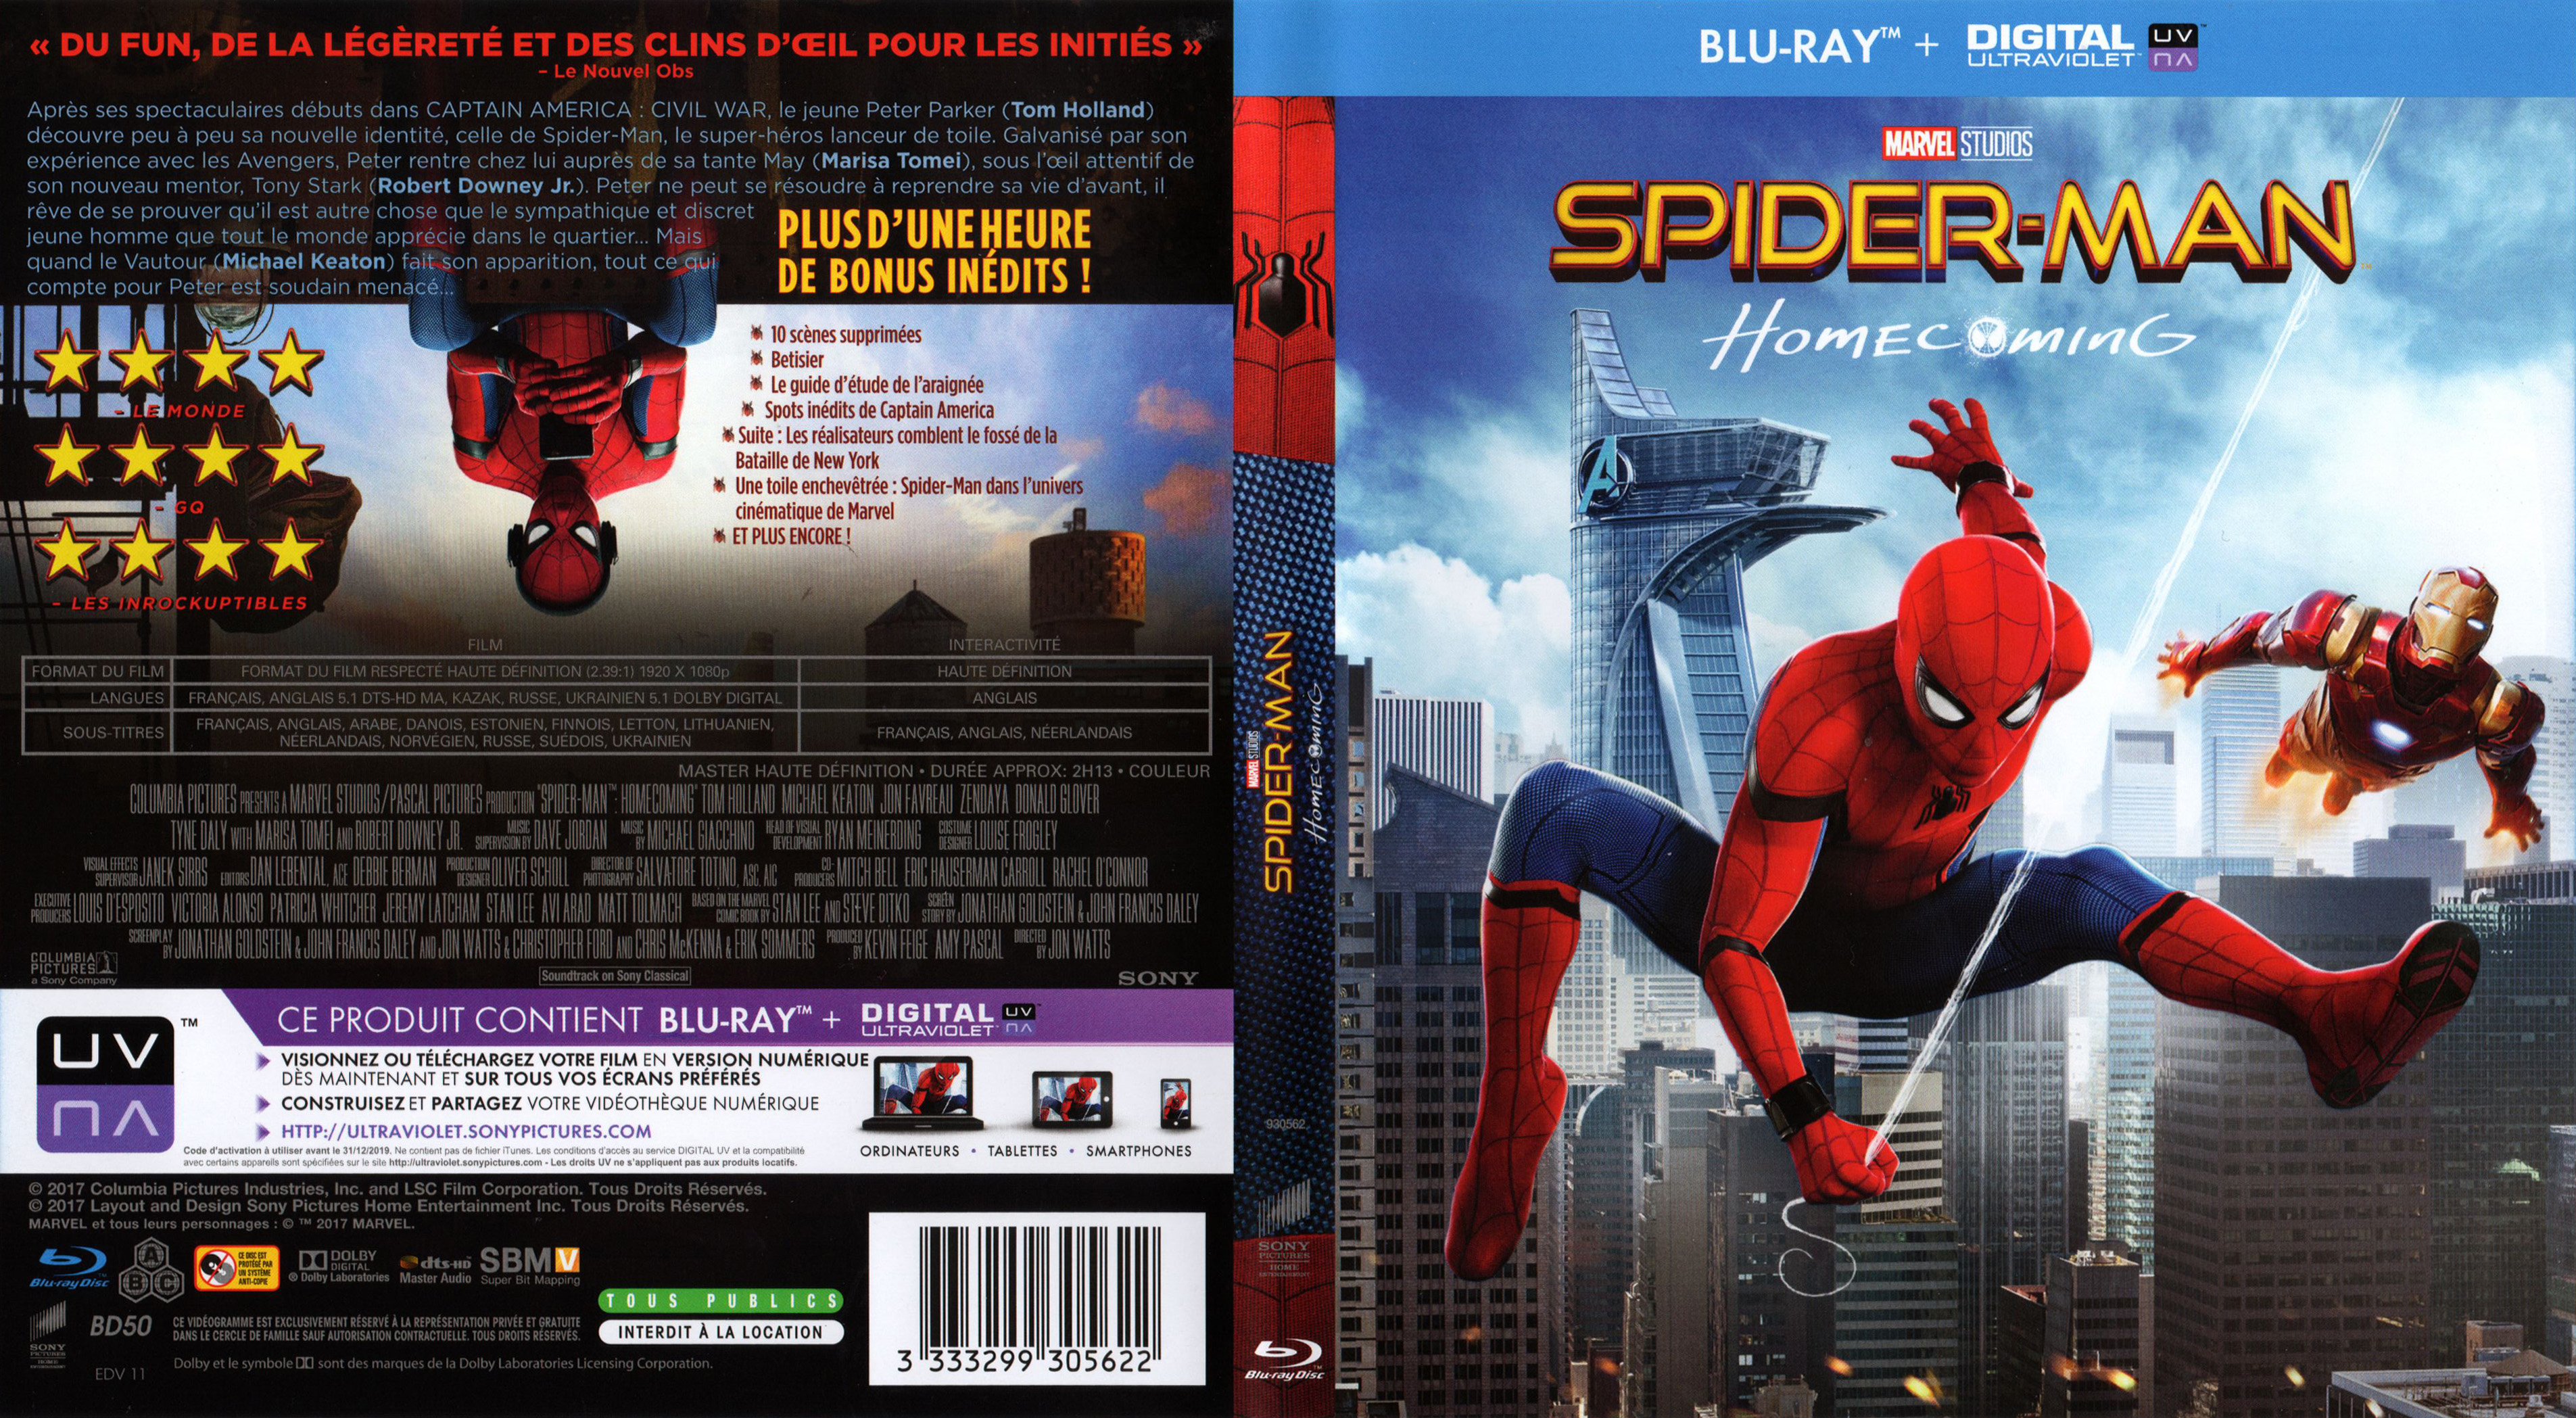 Jaquette DVD Spider-Man Homecoming (BLU-RAY)